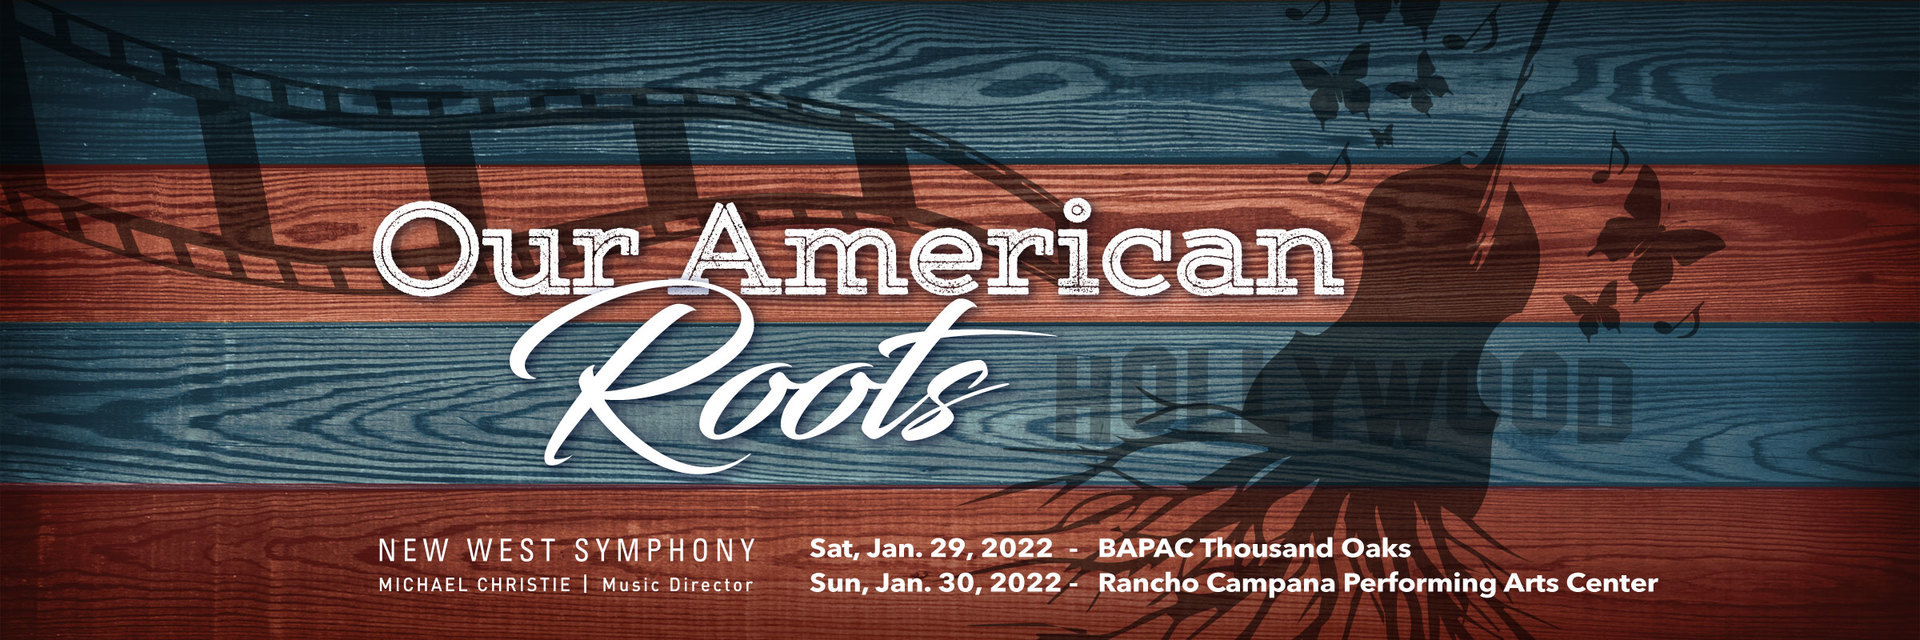 Our American Roots, Camarillo, California, United States